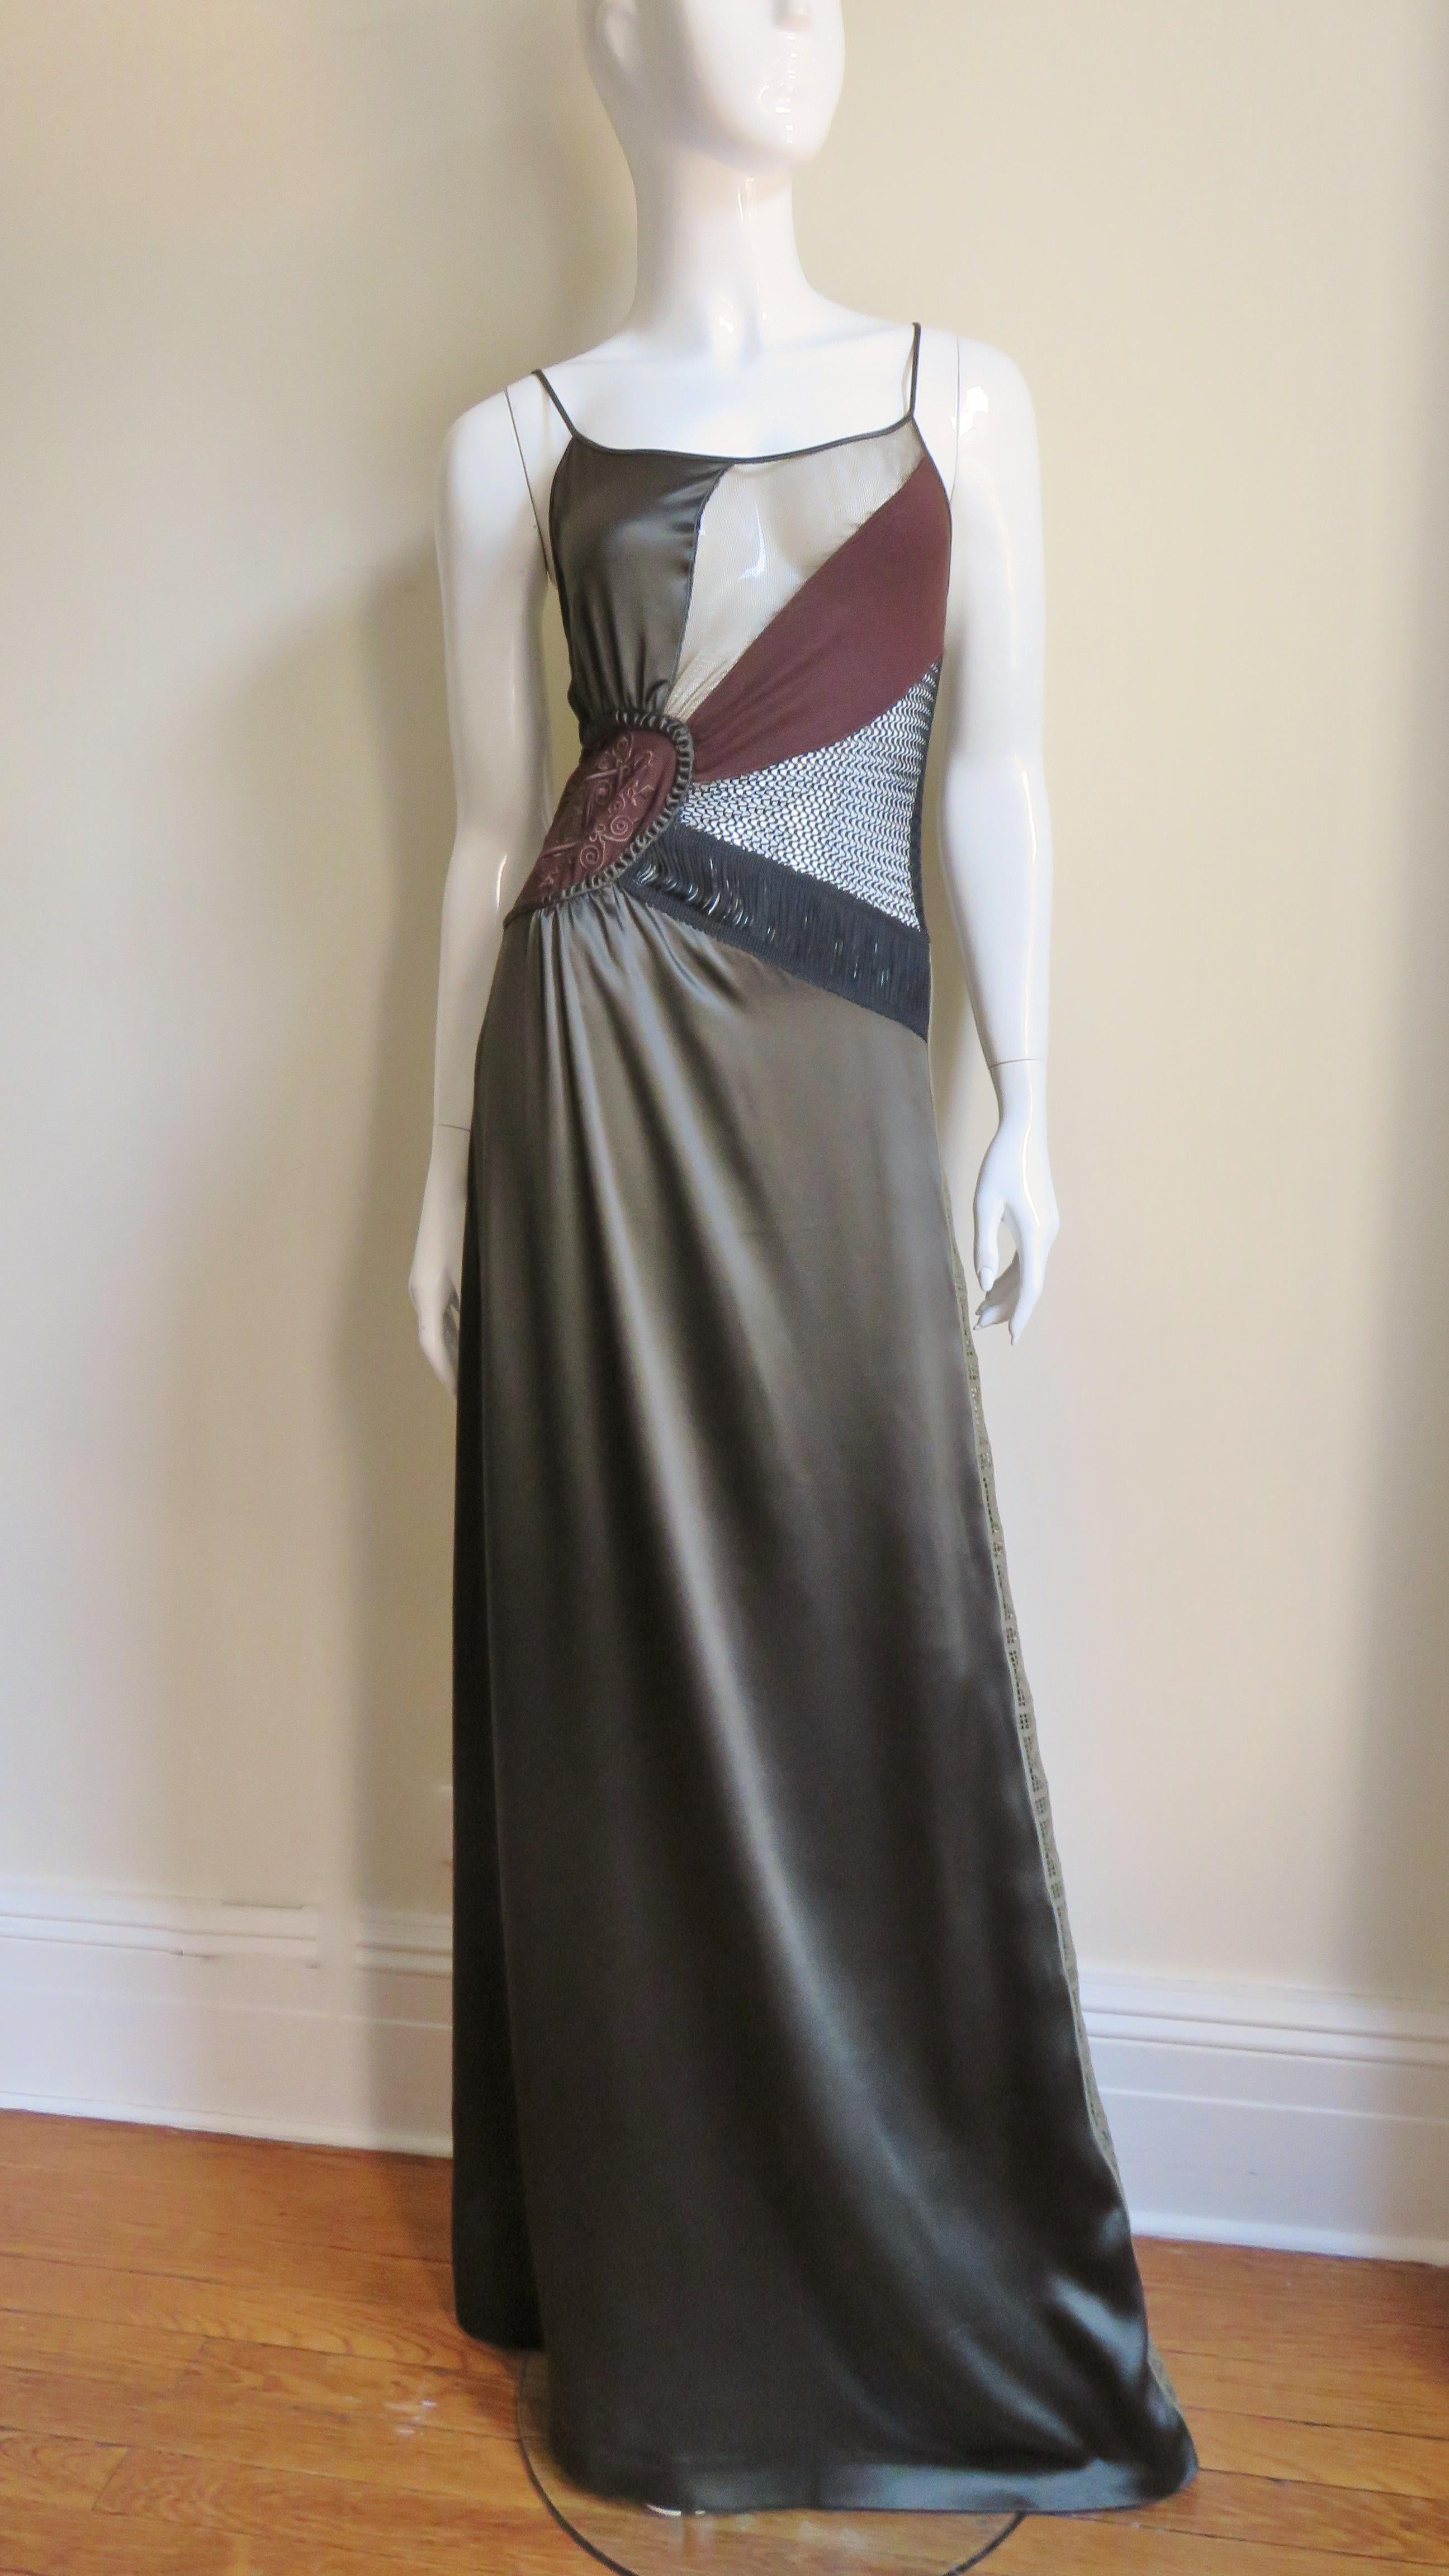 A fabulous silk slip dress from Jean Paul Gaultier in olive green.  It has spaghetti straps on a bodice highlighted at the waist with a row of black silk fringe and a detailed, richly embroidered brown crest on one side.  The bodice front is